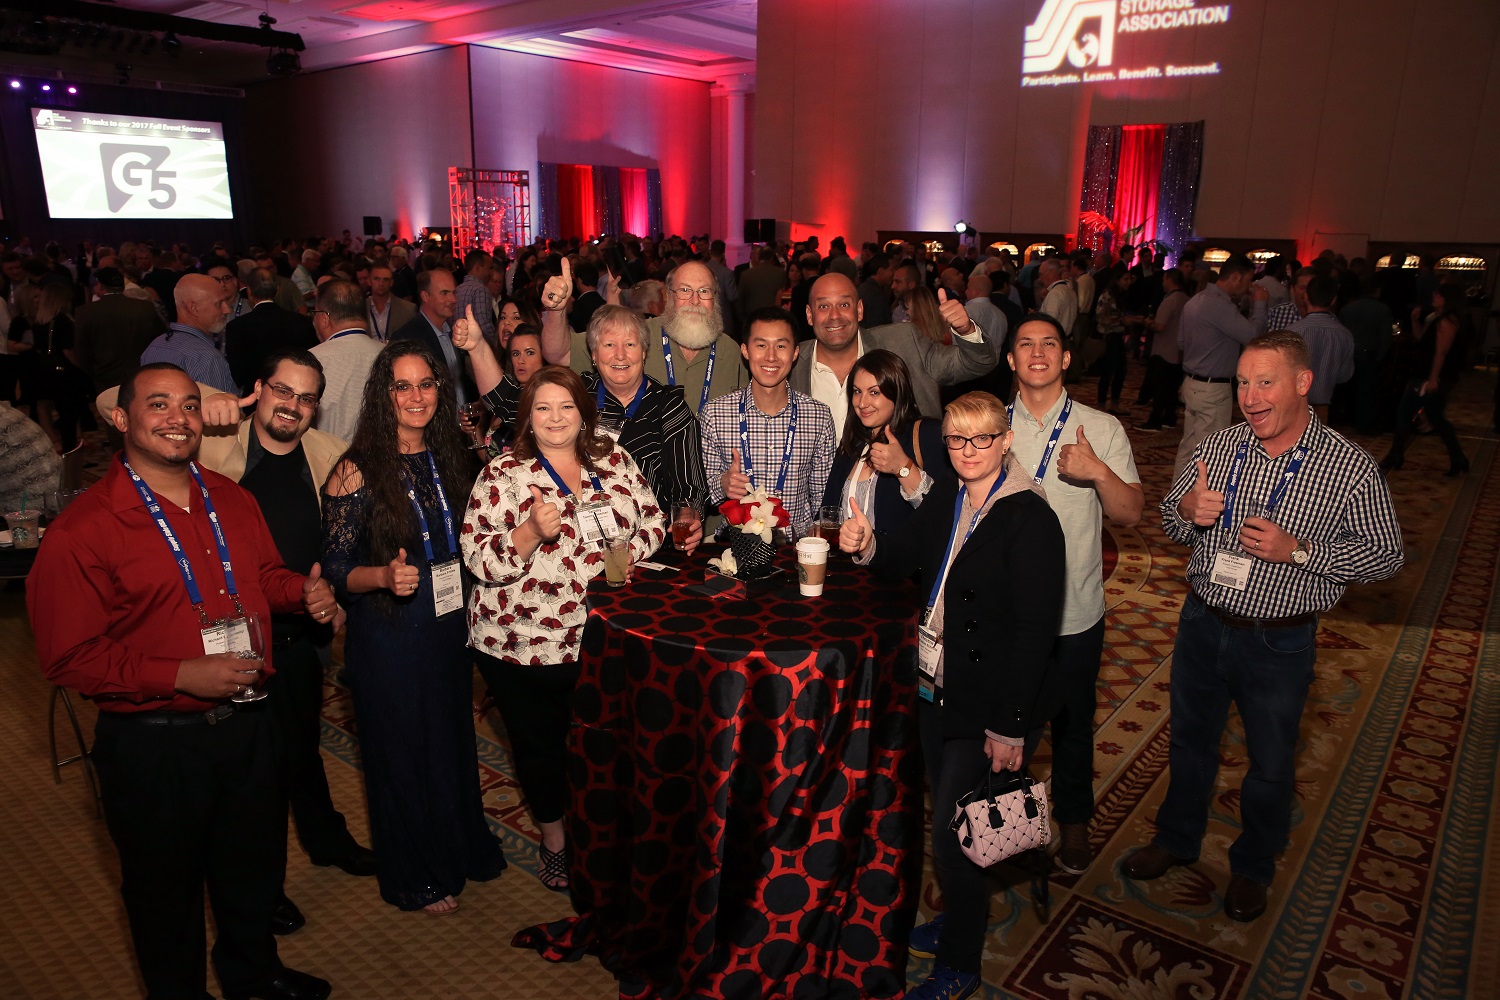 Ssa fall conference and tradeshow - 2020 | ssa fall conference and tradeshow 2019 participants | ssa fall conference and tradeshow - 2020